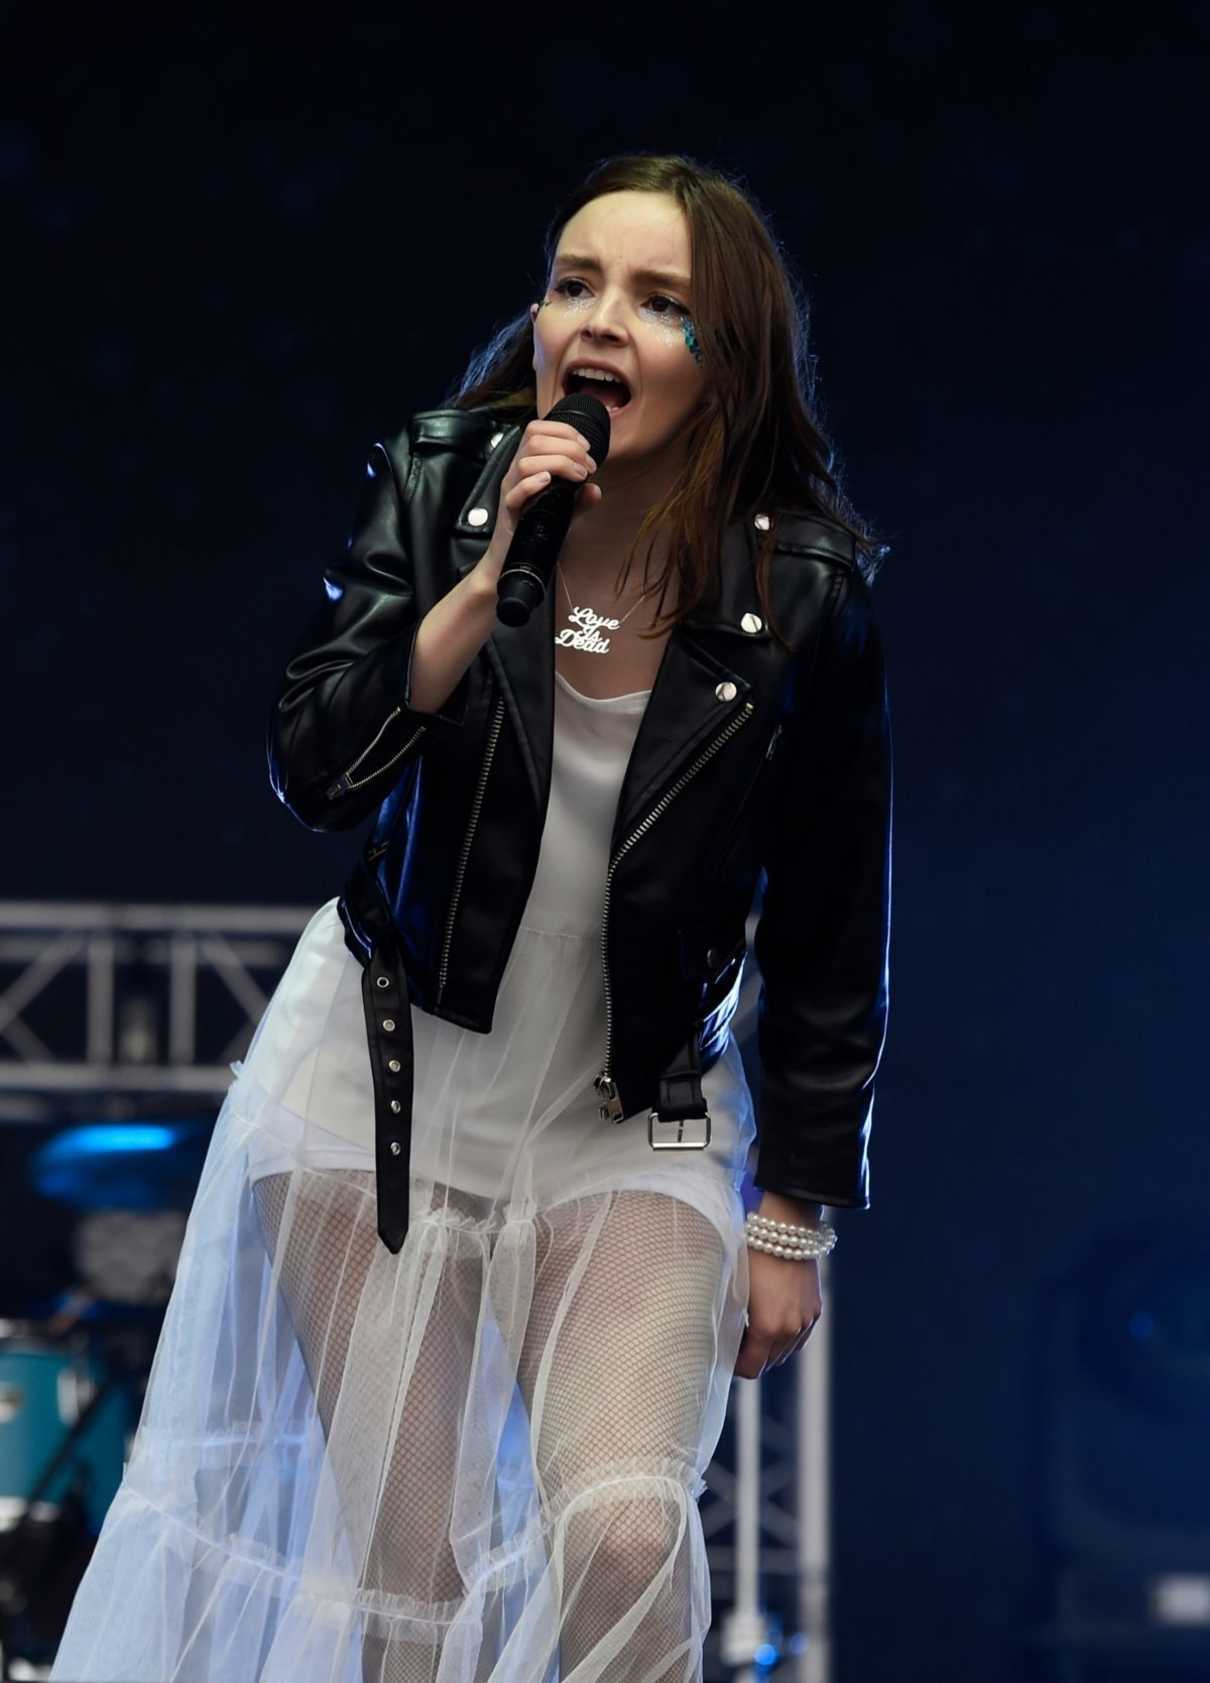 Lauren Mayberry Performs During the Parklife Festival at Heaton Park in Manchester 06/10/2018-2